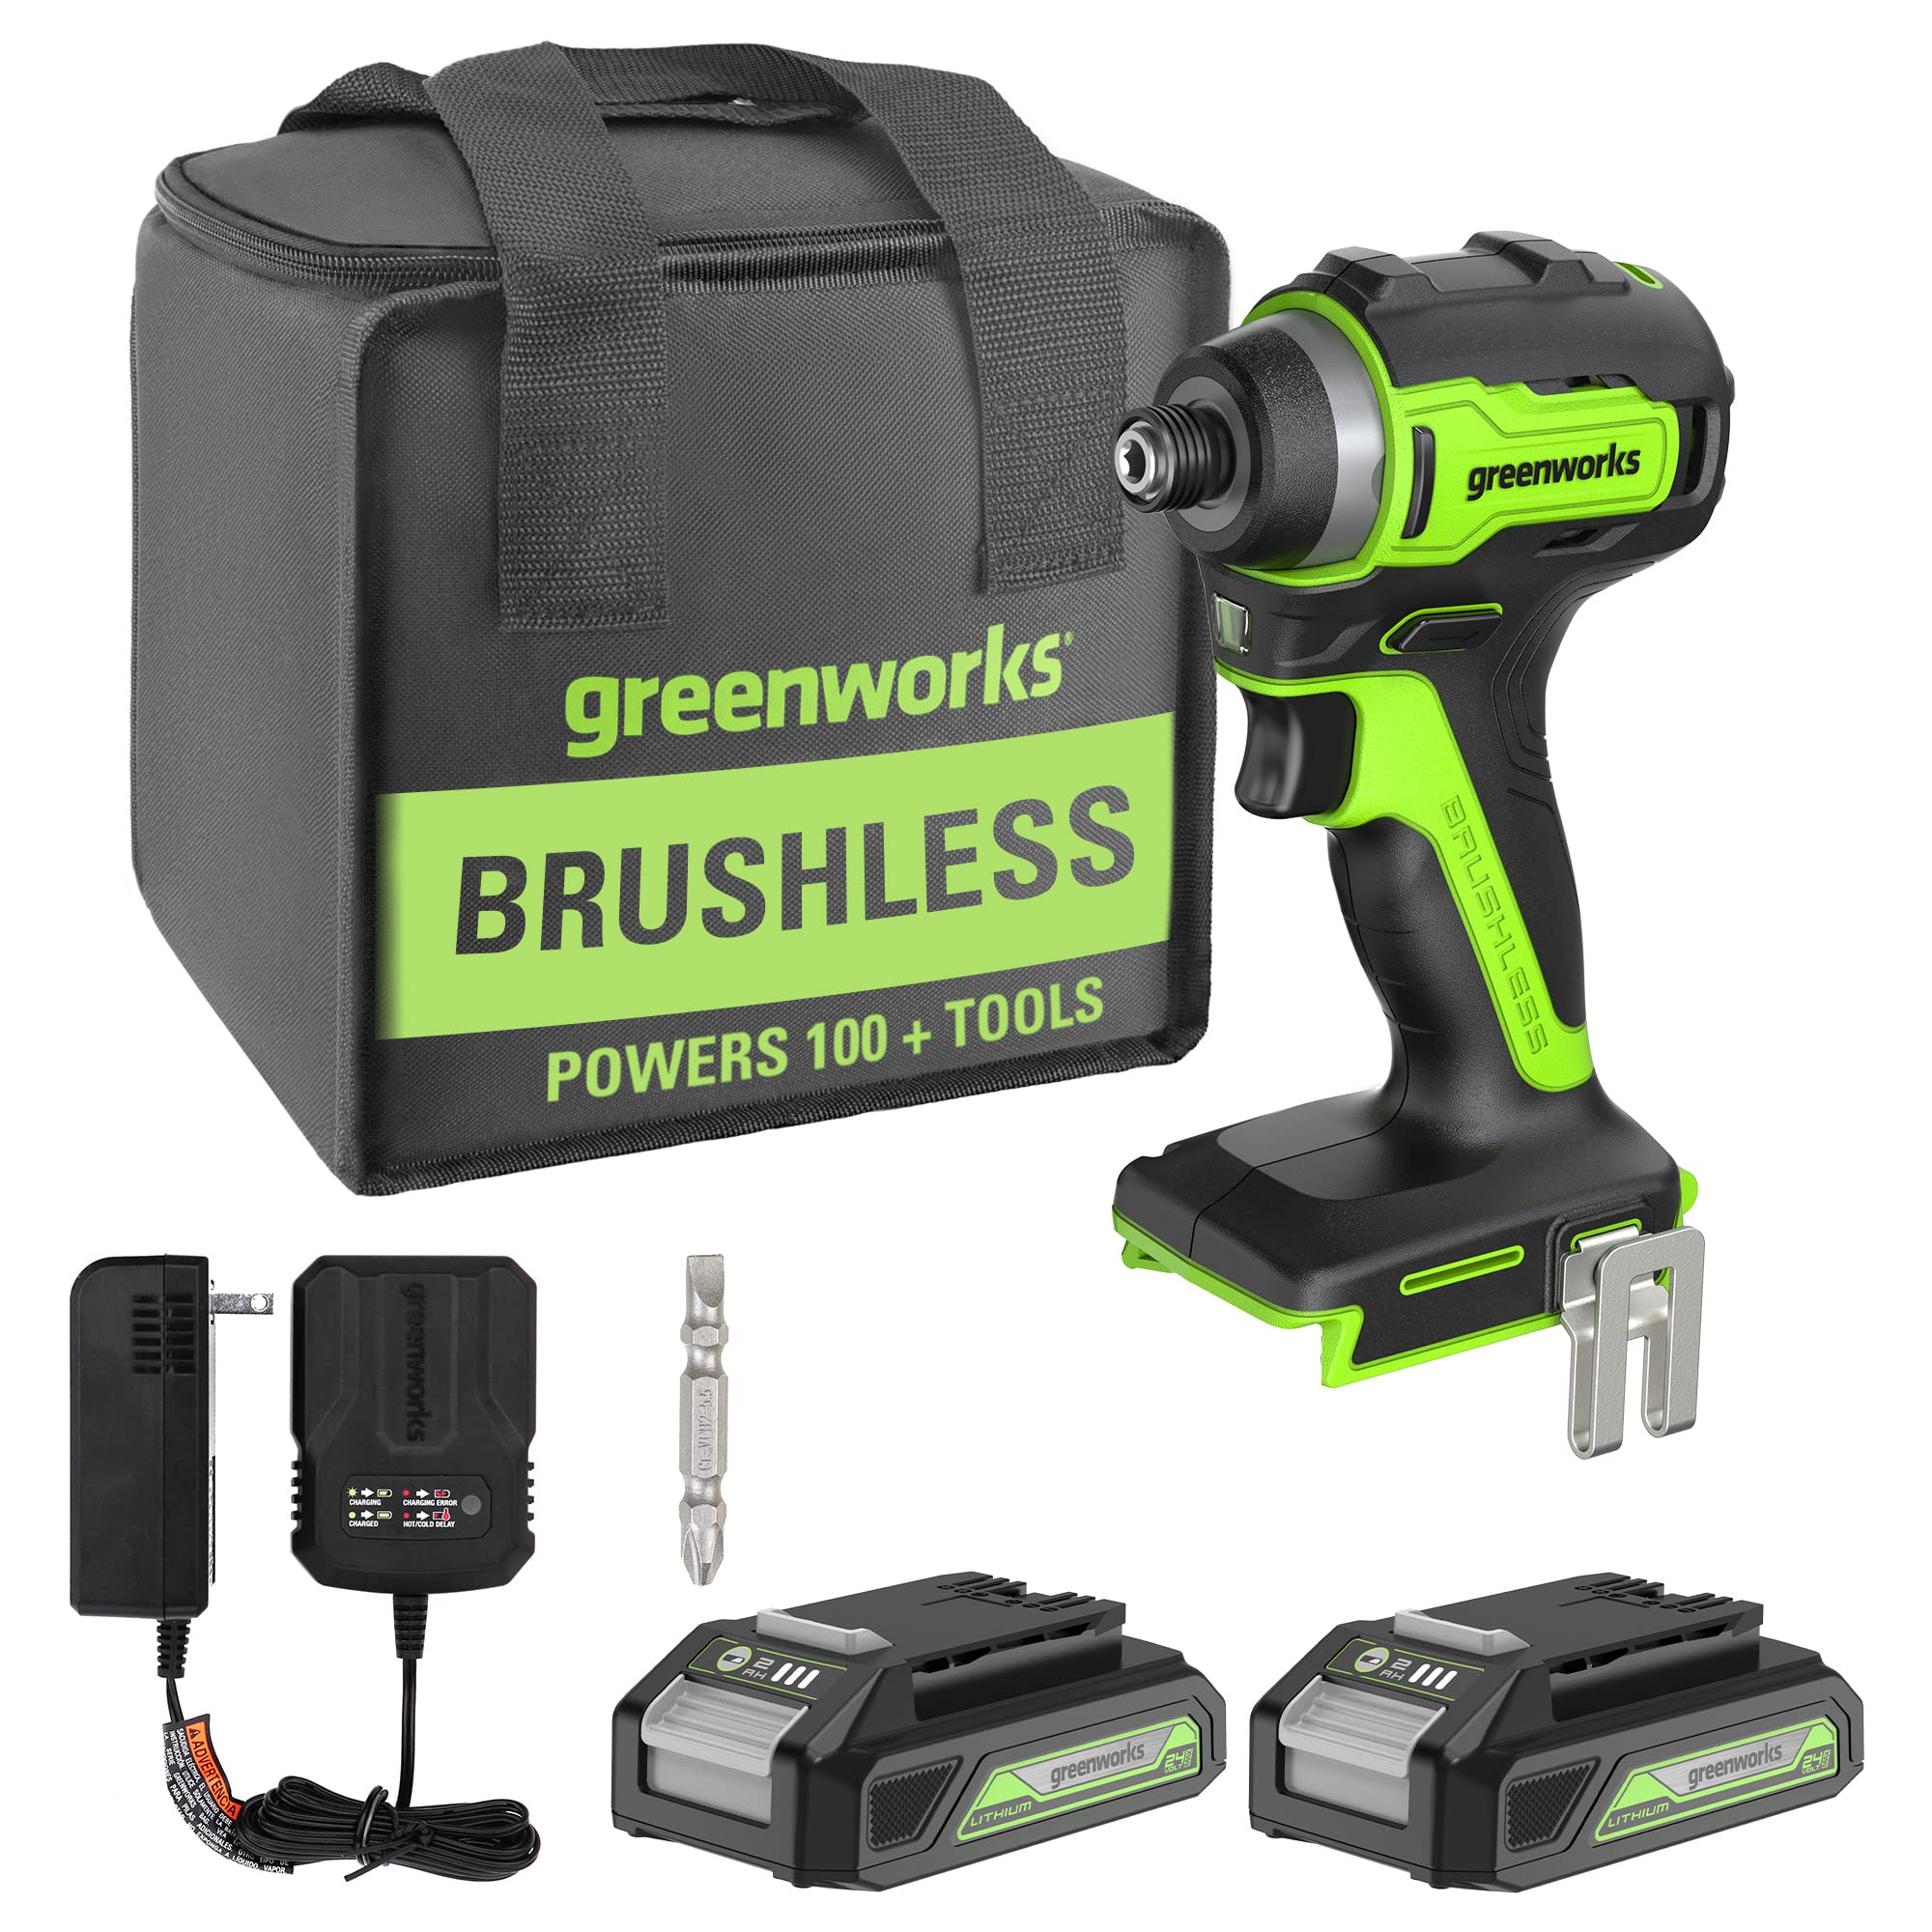 Greenworks 24V Cordless Impact Driver Kit, 1/4-inch Hex, 1950 in./lbs Torque, Variable Speed Brushless Impact Drill/Driver Set, 2 Batteries & Adapter charger, Bits and To - $65.90